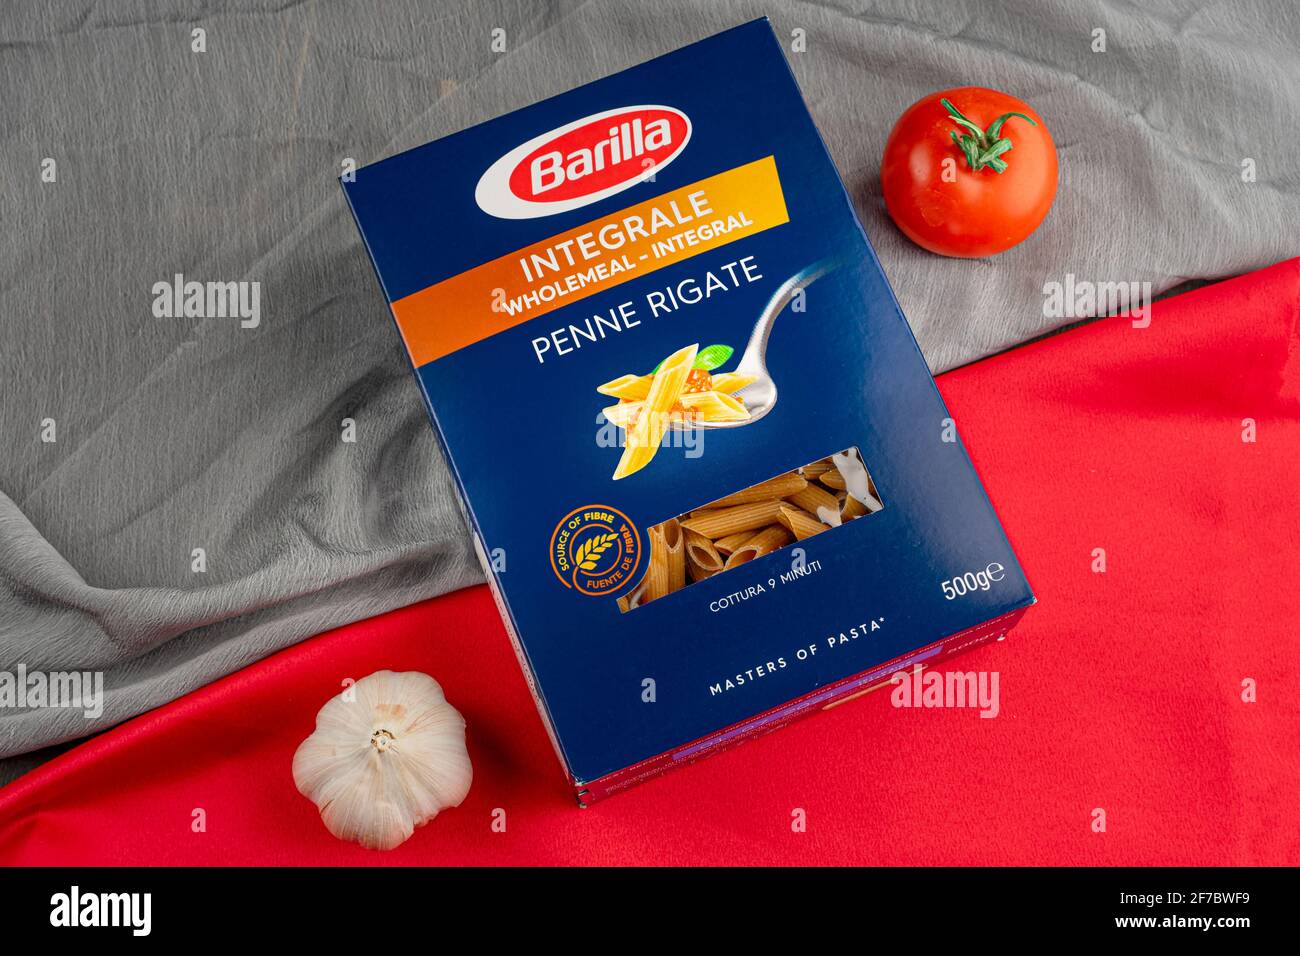 https://c8.alamy.com/comp/2F7BWF9/barilla-products-italian-pasta-penne-rigate-barilla-group-produces-several-kinds-of-pasta-and-it-is-the-worlds-leading-pasta-maker-2F7BWF9.jpg